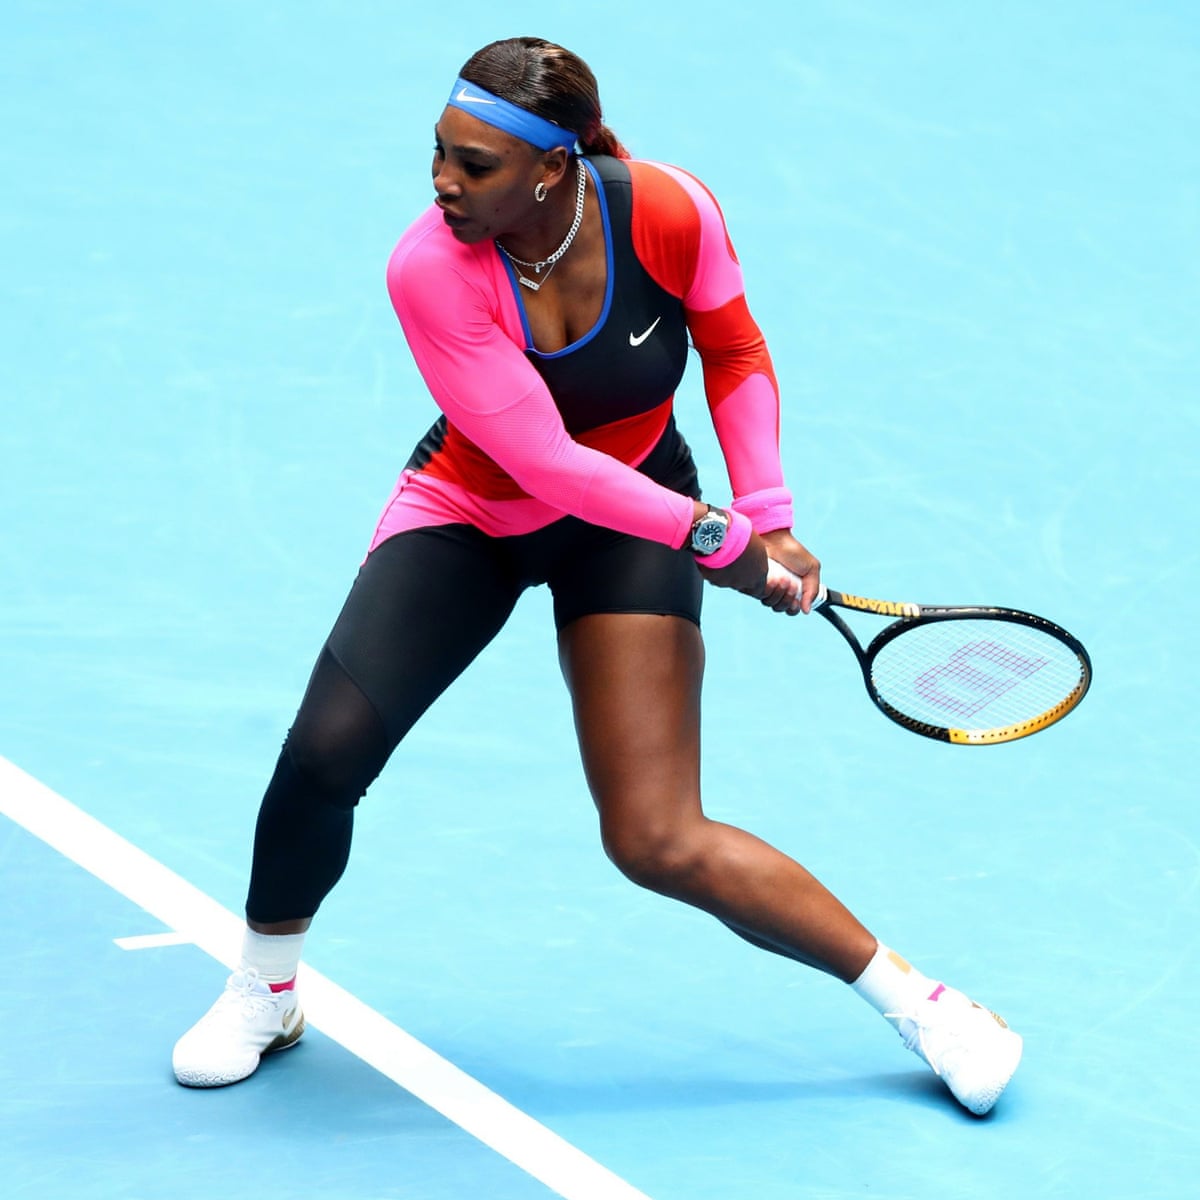 Williams brings back the 'one legger' with catsuit inspired by Flo-Jo | Serena Williams | Guardian